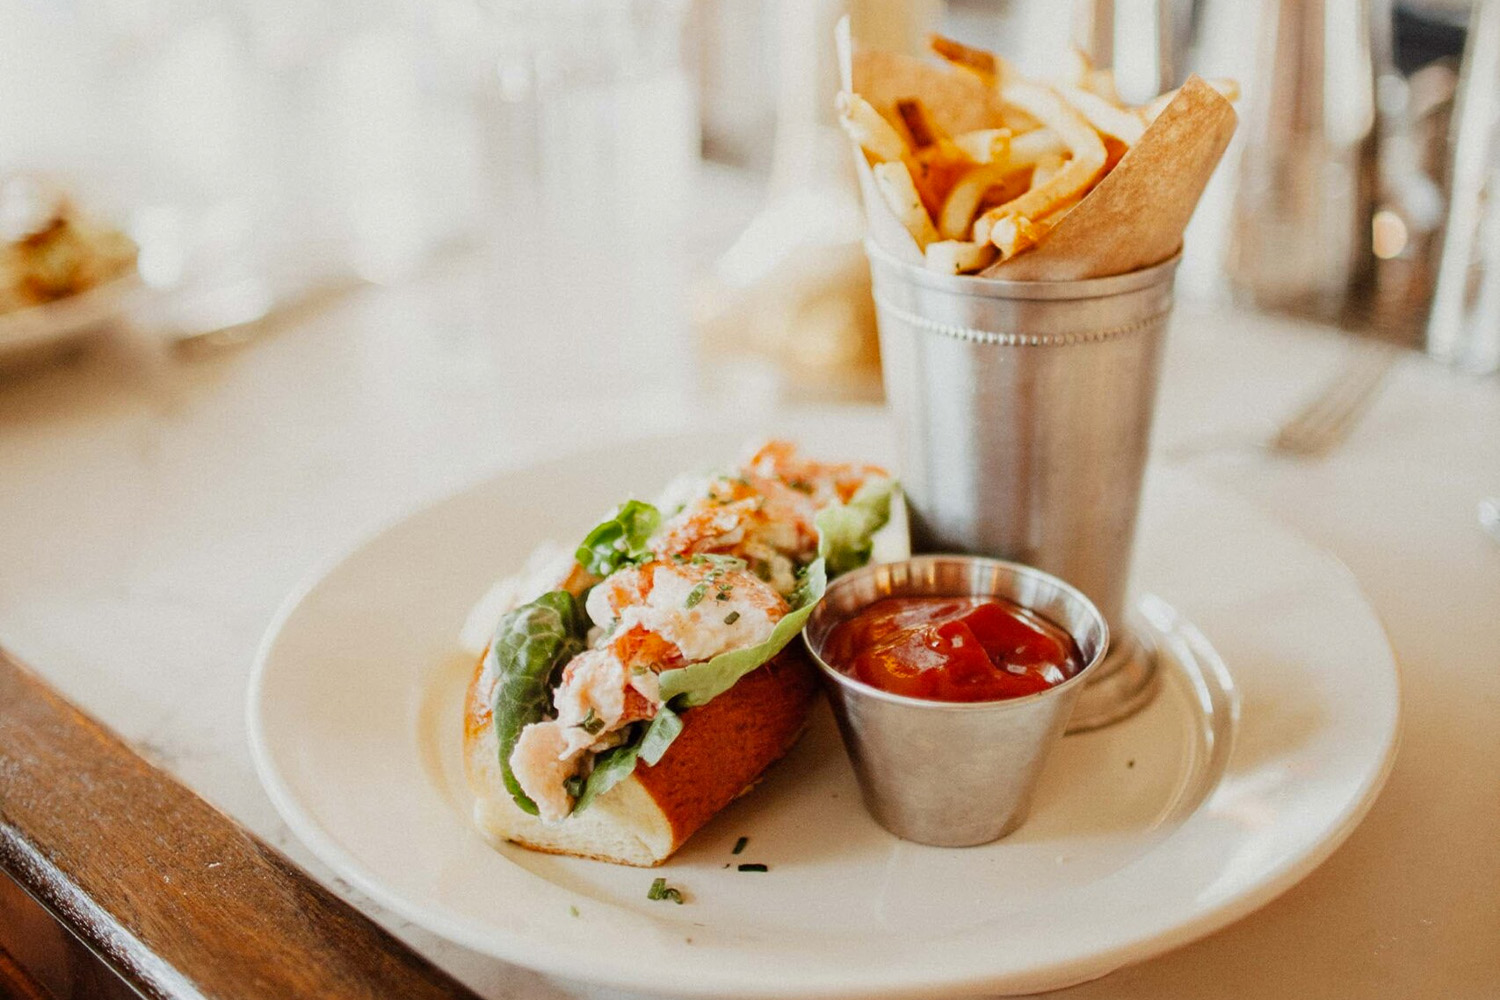 Lobster roll and fries on a plate